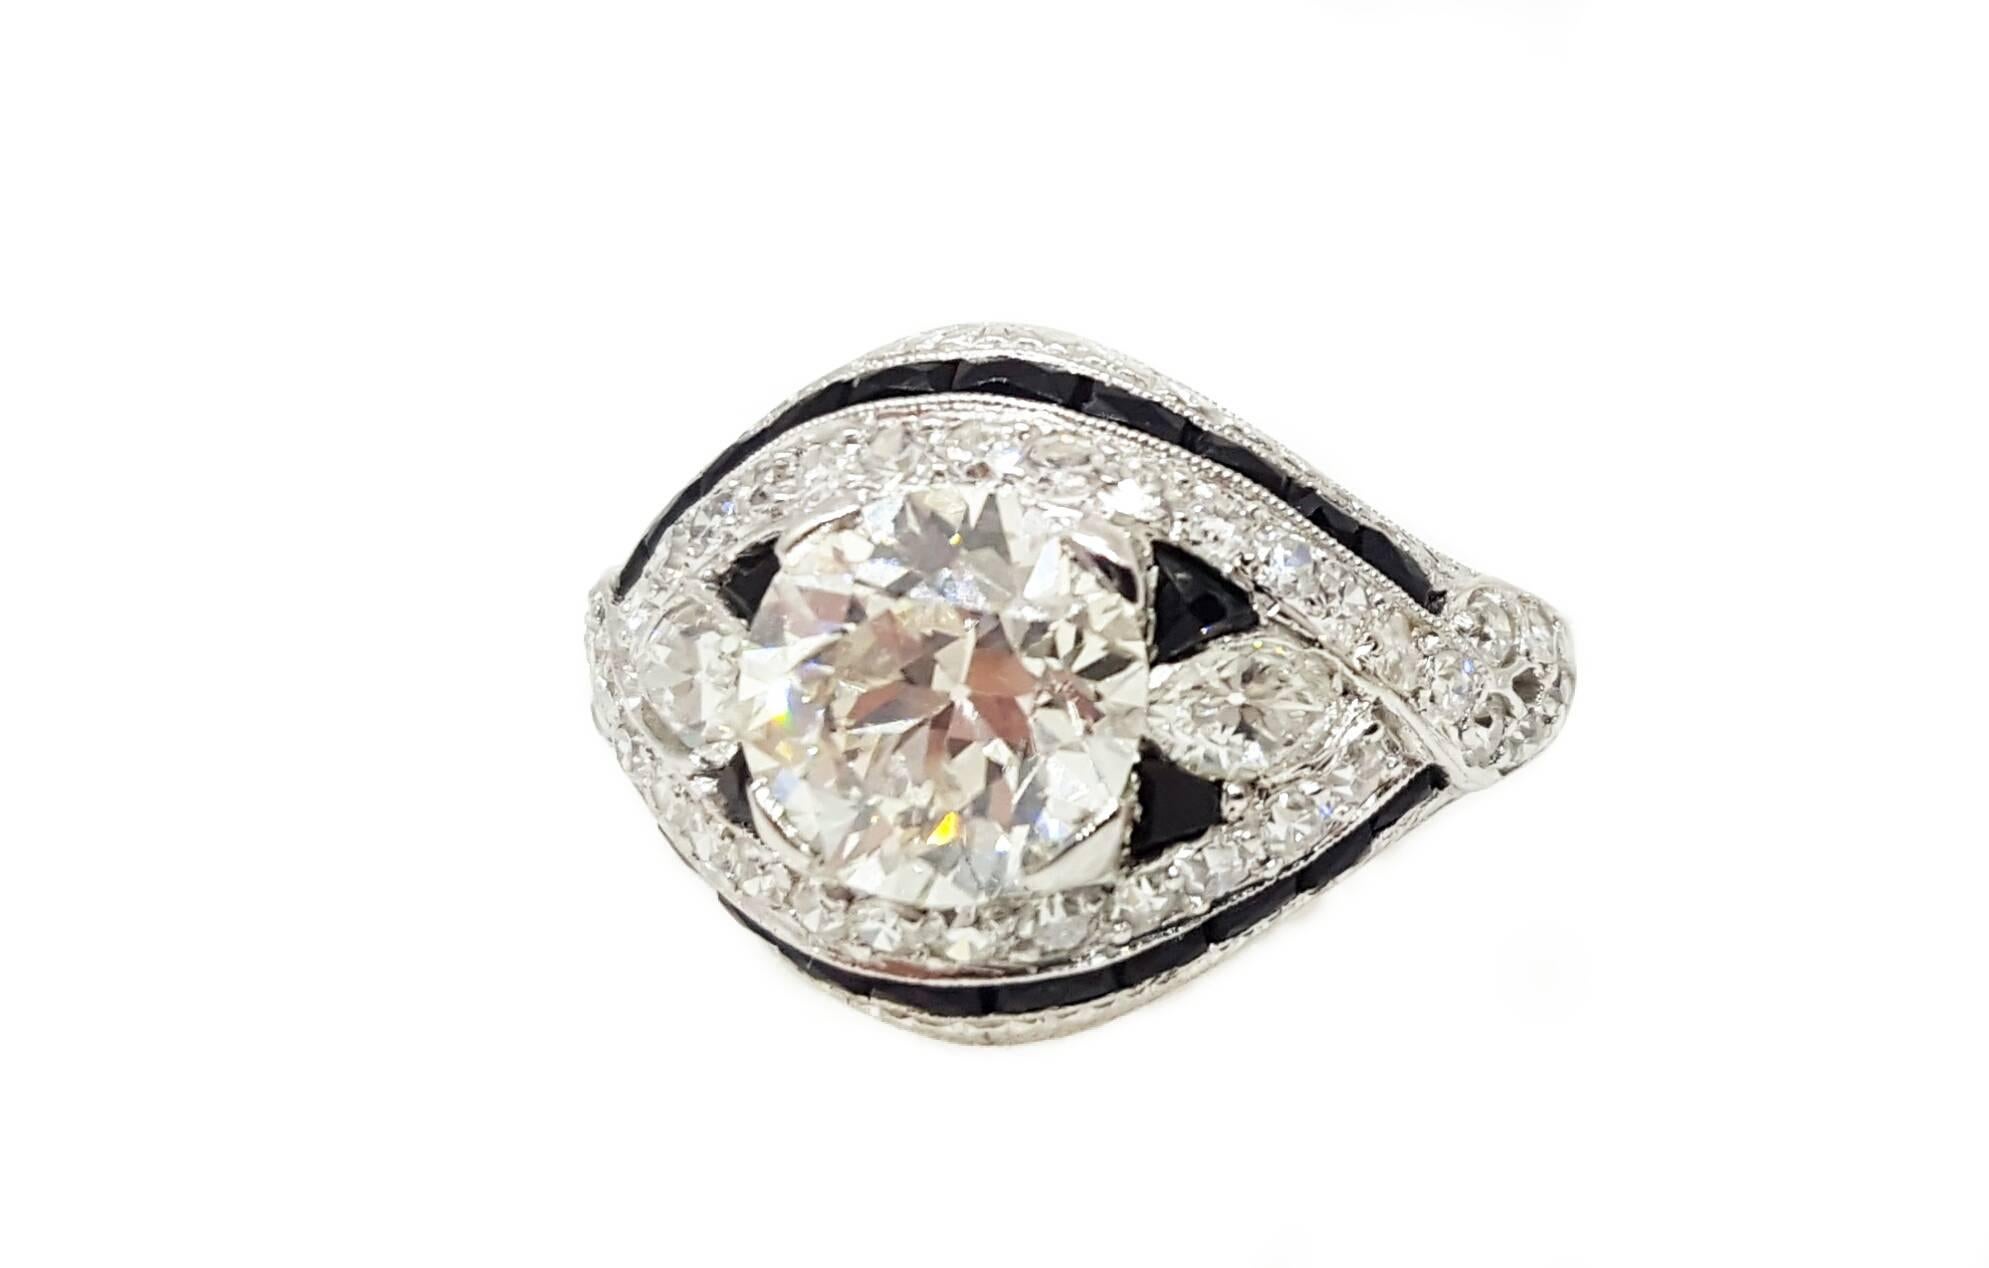 A unique and beautiful ring from the 1930's. Crafted in platinum, the center diamond is a 1.70ct L color, VS2 clarity, Old European cut. In addition to the center diamond, there are 2 Marquise cut diamonds that weigh 0.25ct each and 38 single cut